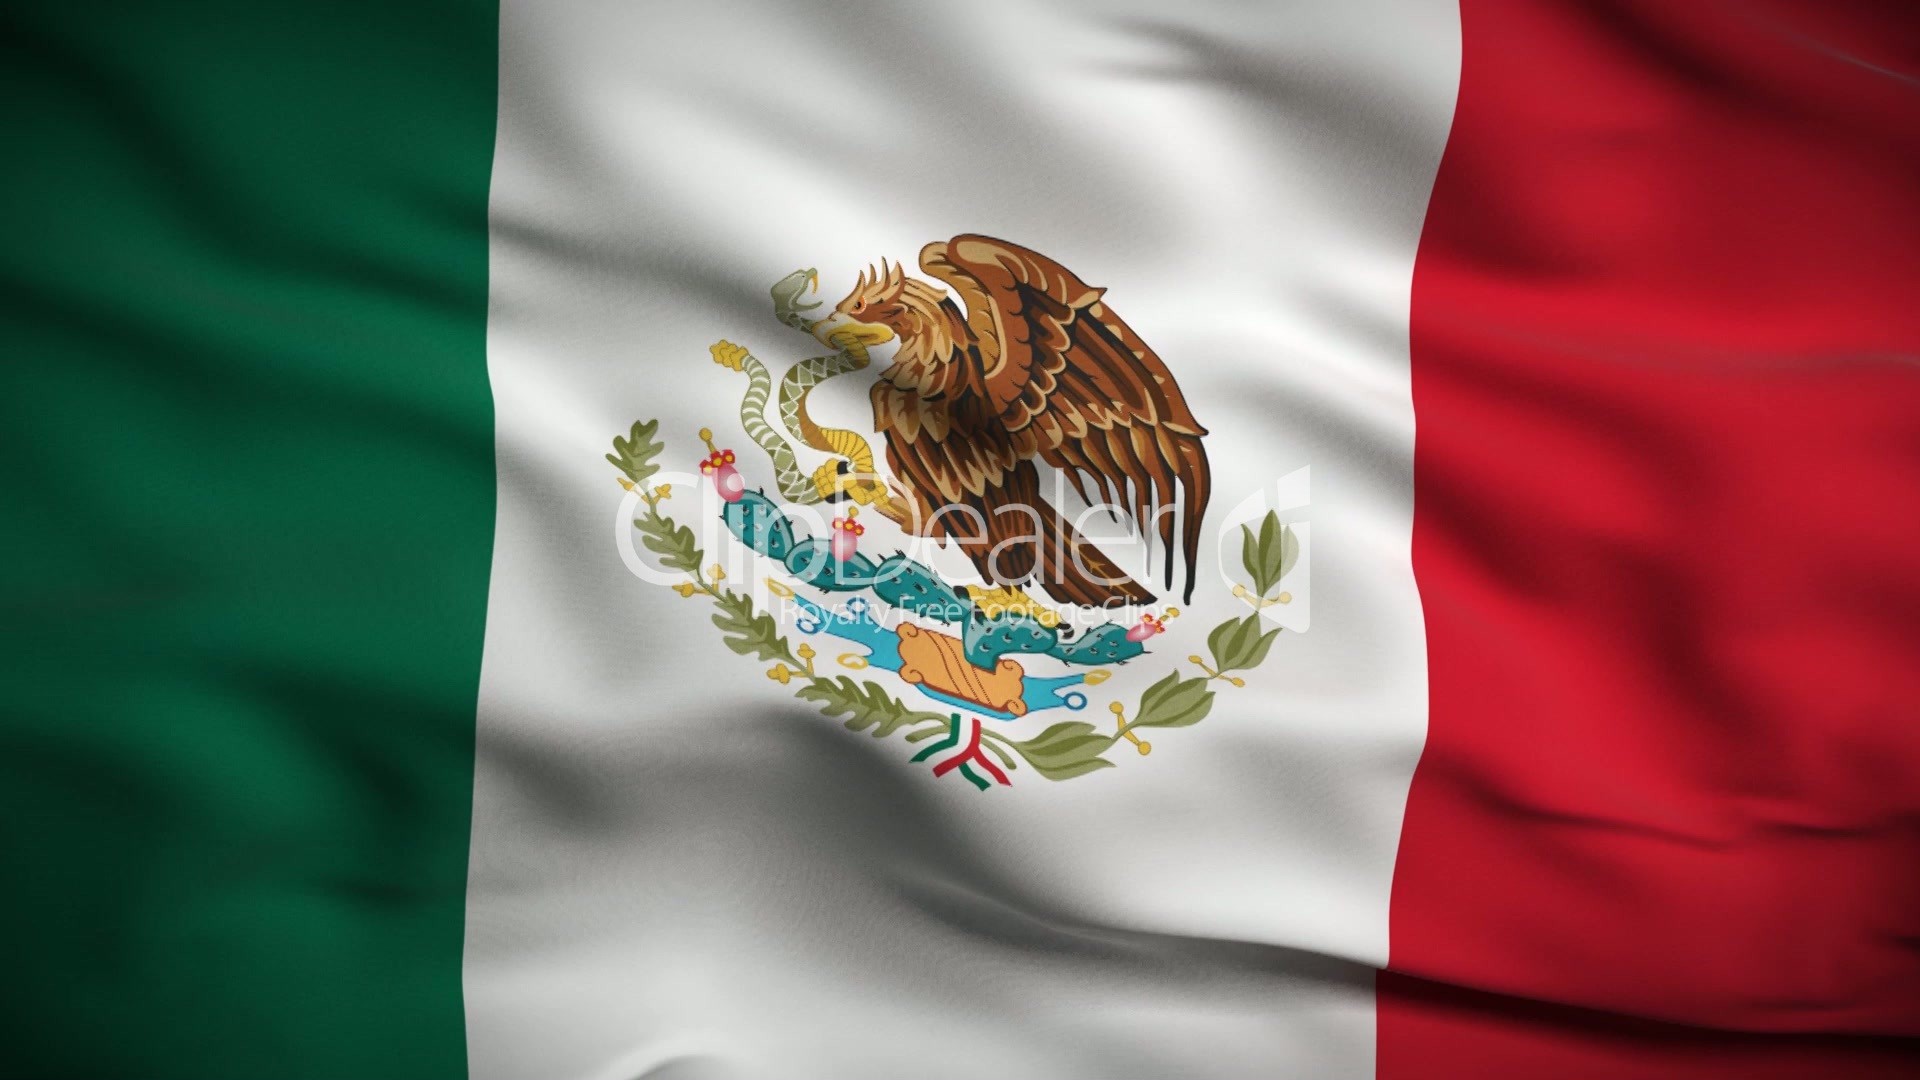 1920x1080 Mexican Flag Hd Looped Royalty And Stock Fooe